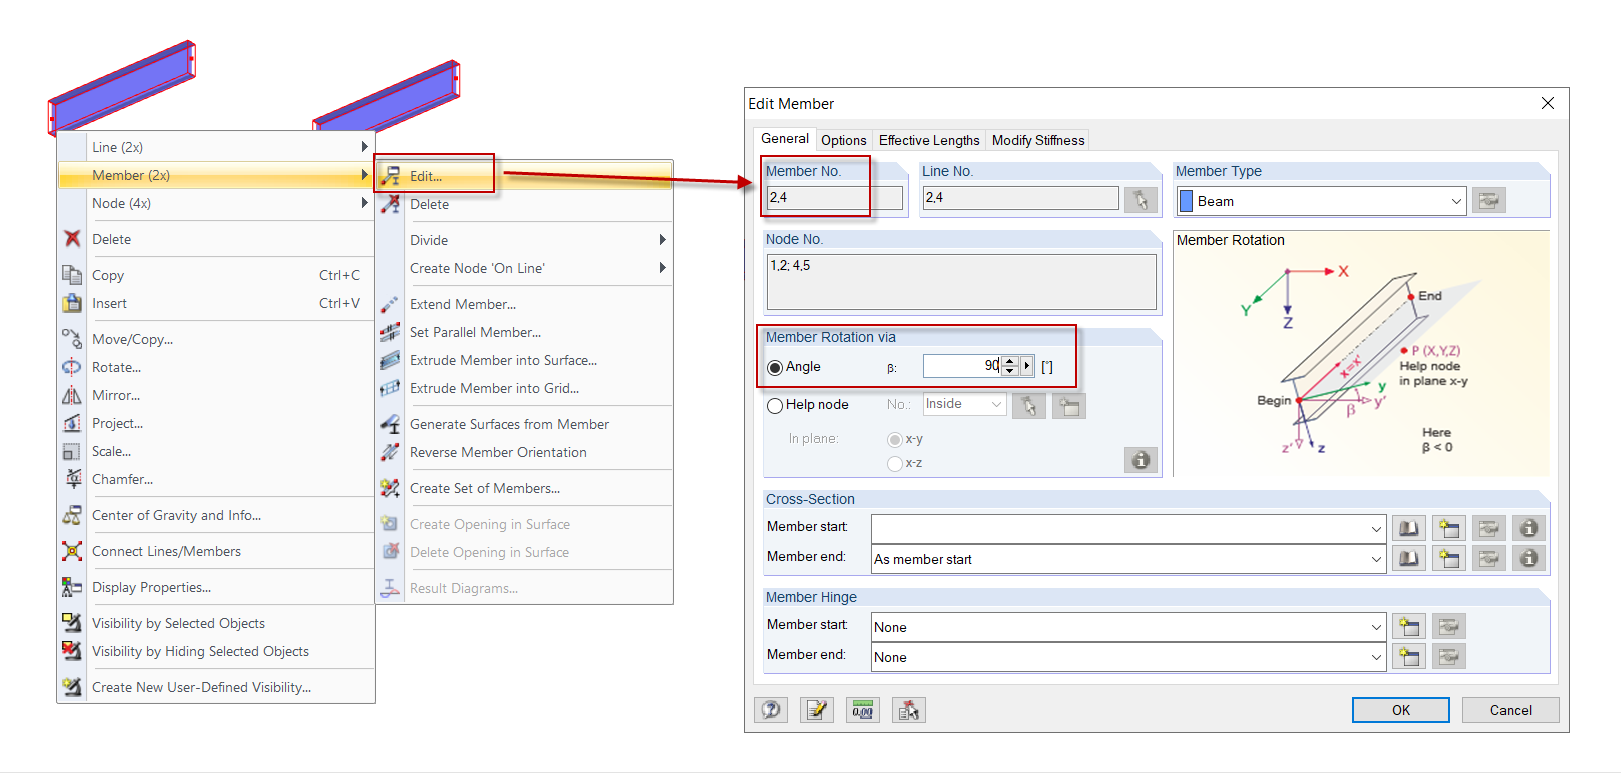 Multi-Selection with Shortcut Menu (Right) and Dialog Box "Edit Member" (Left)